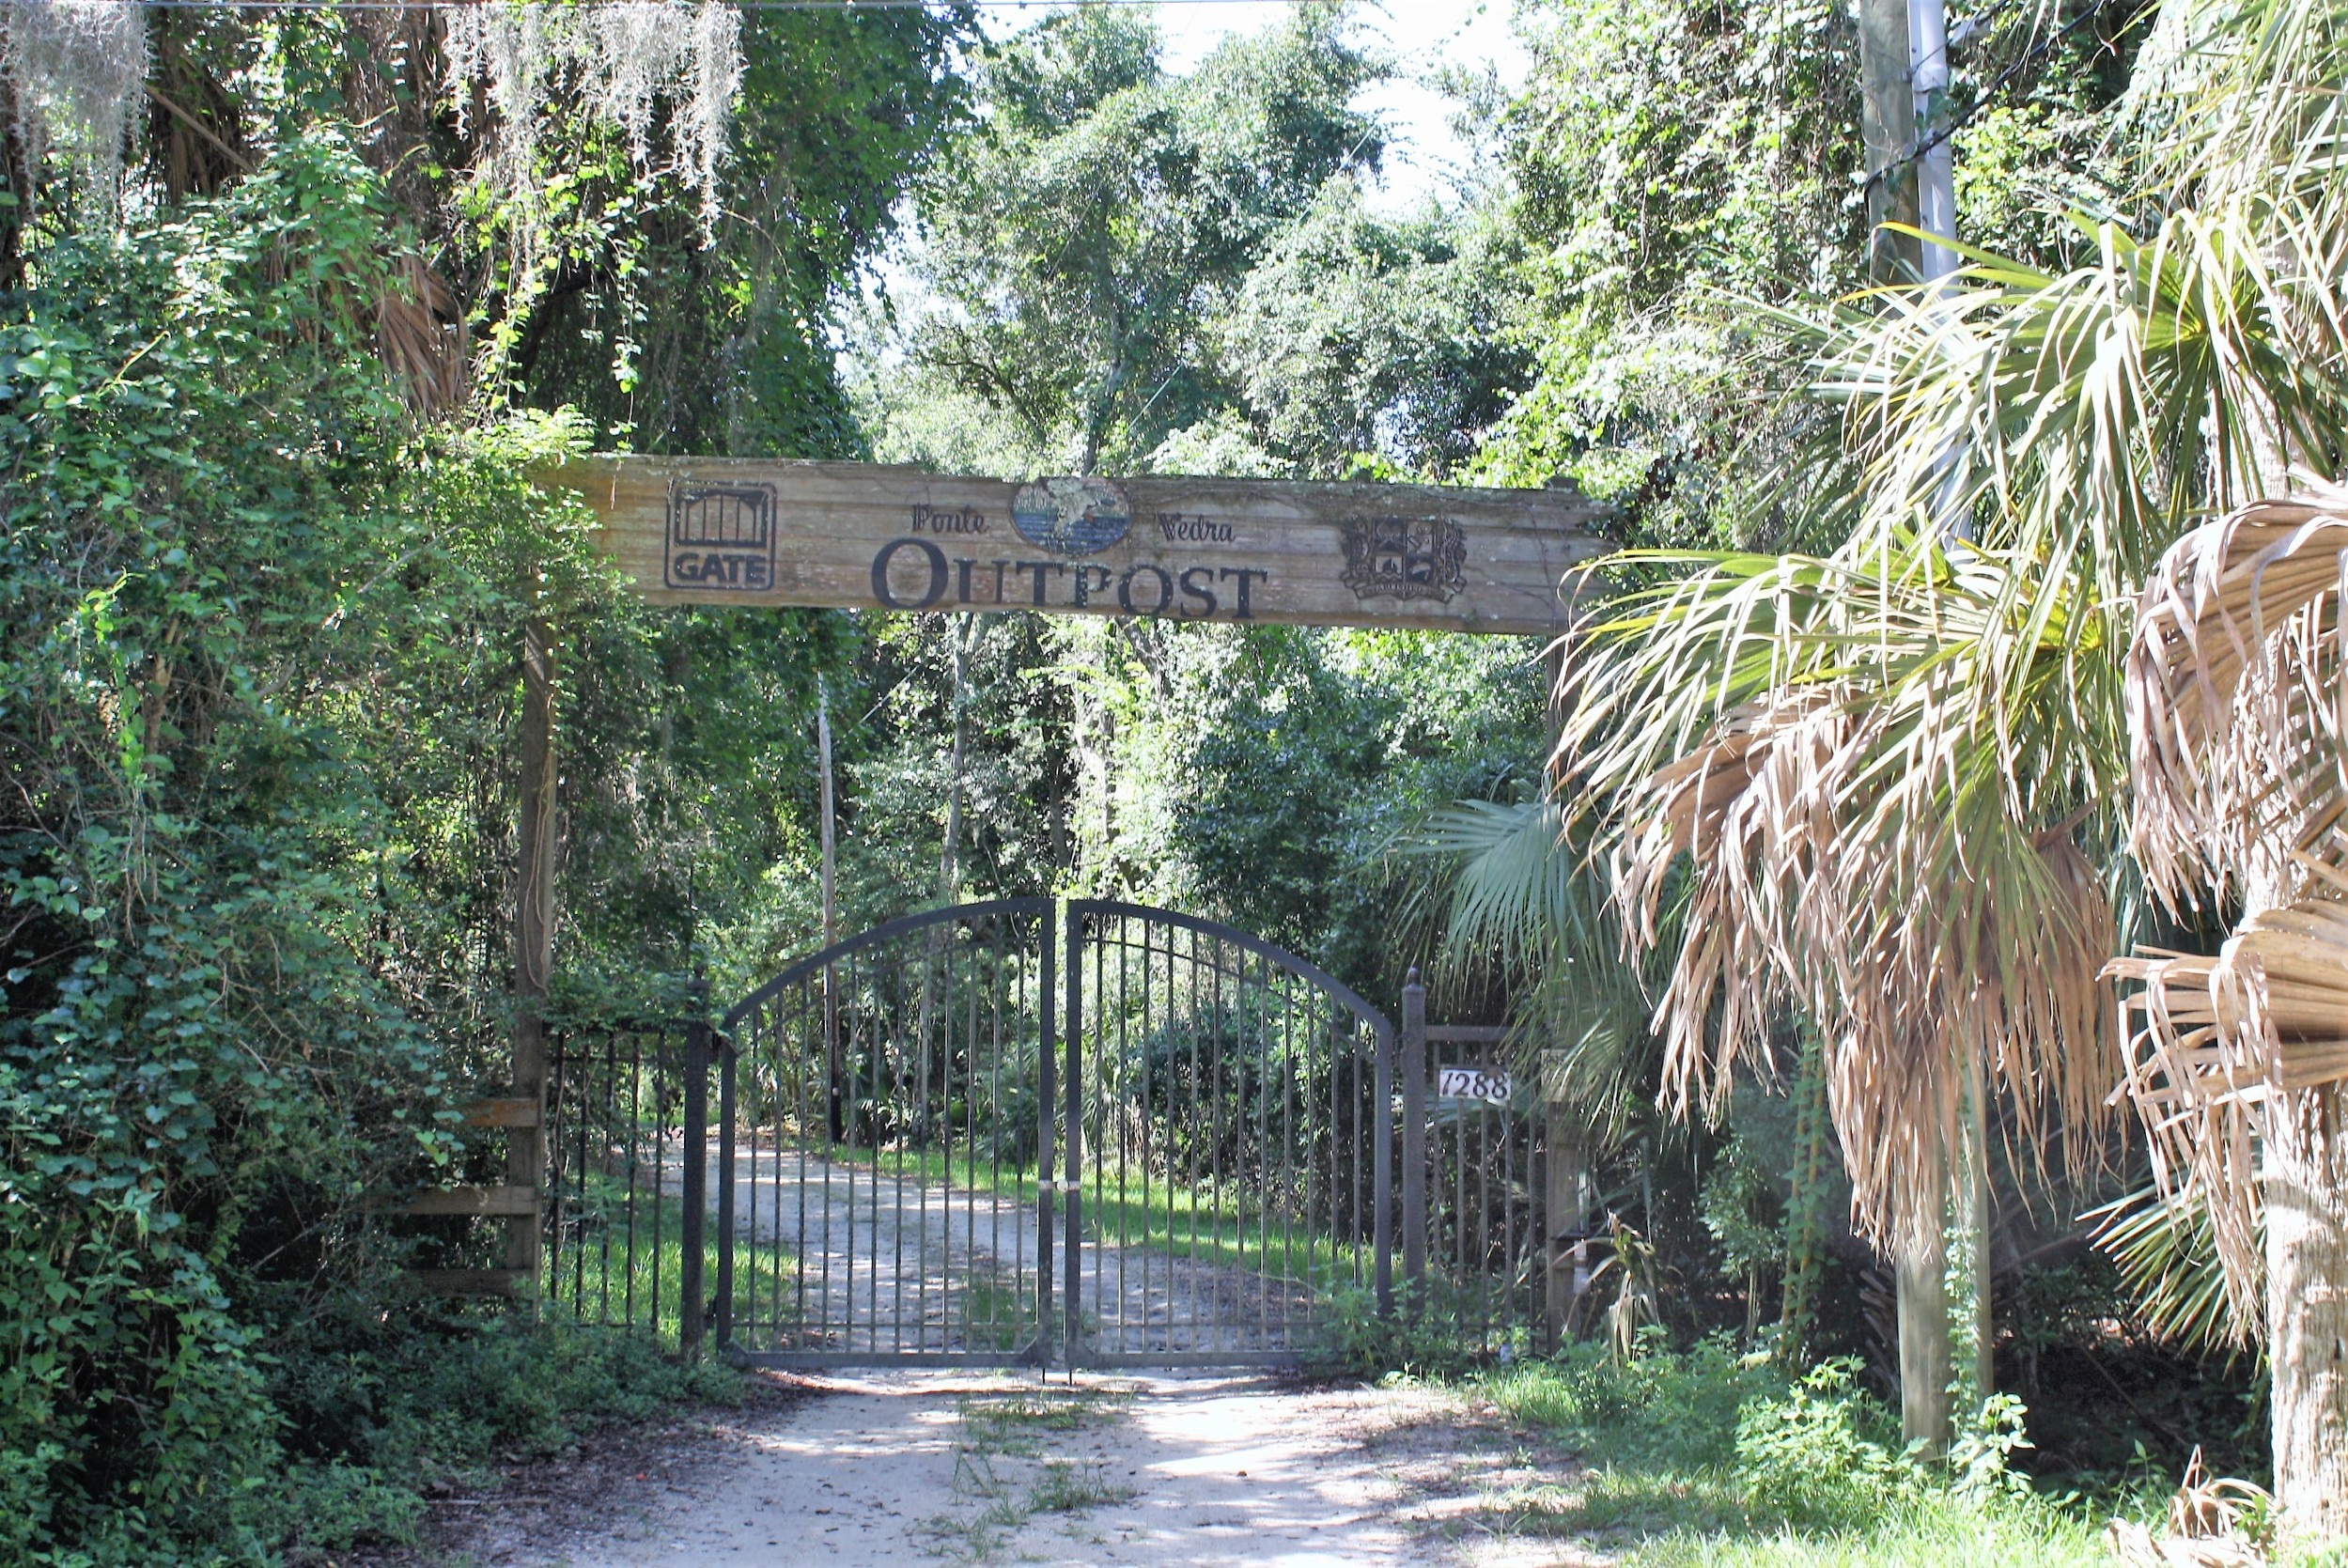 The Outpost is located at the end of Neck Road and adjacent to the GTM Research Reserve.